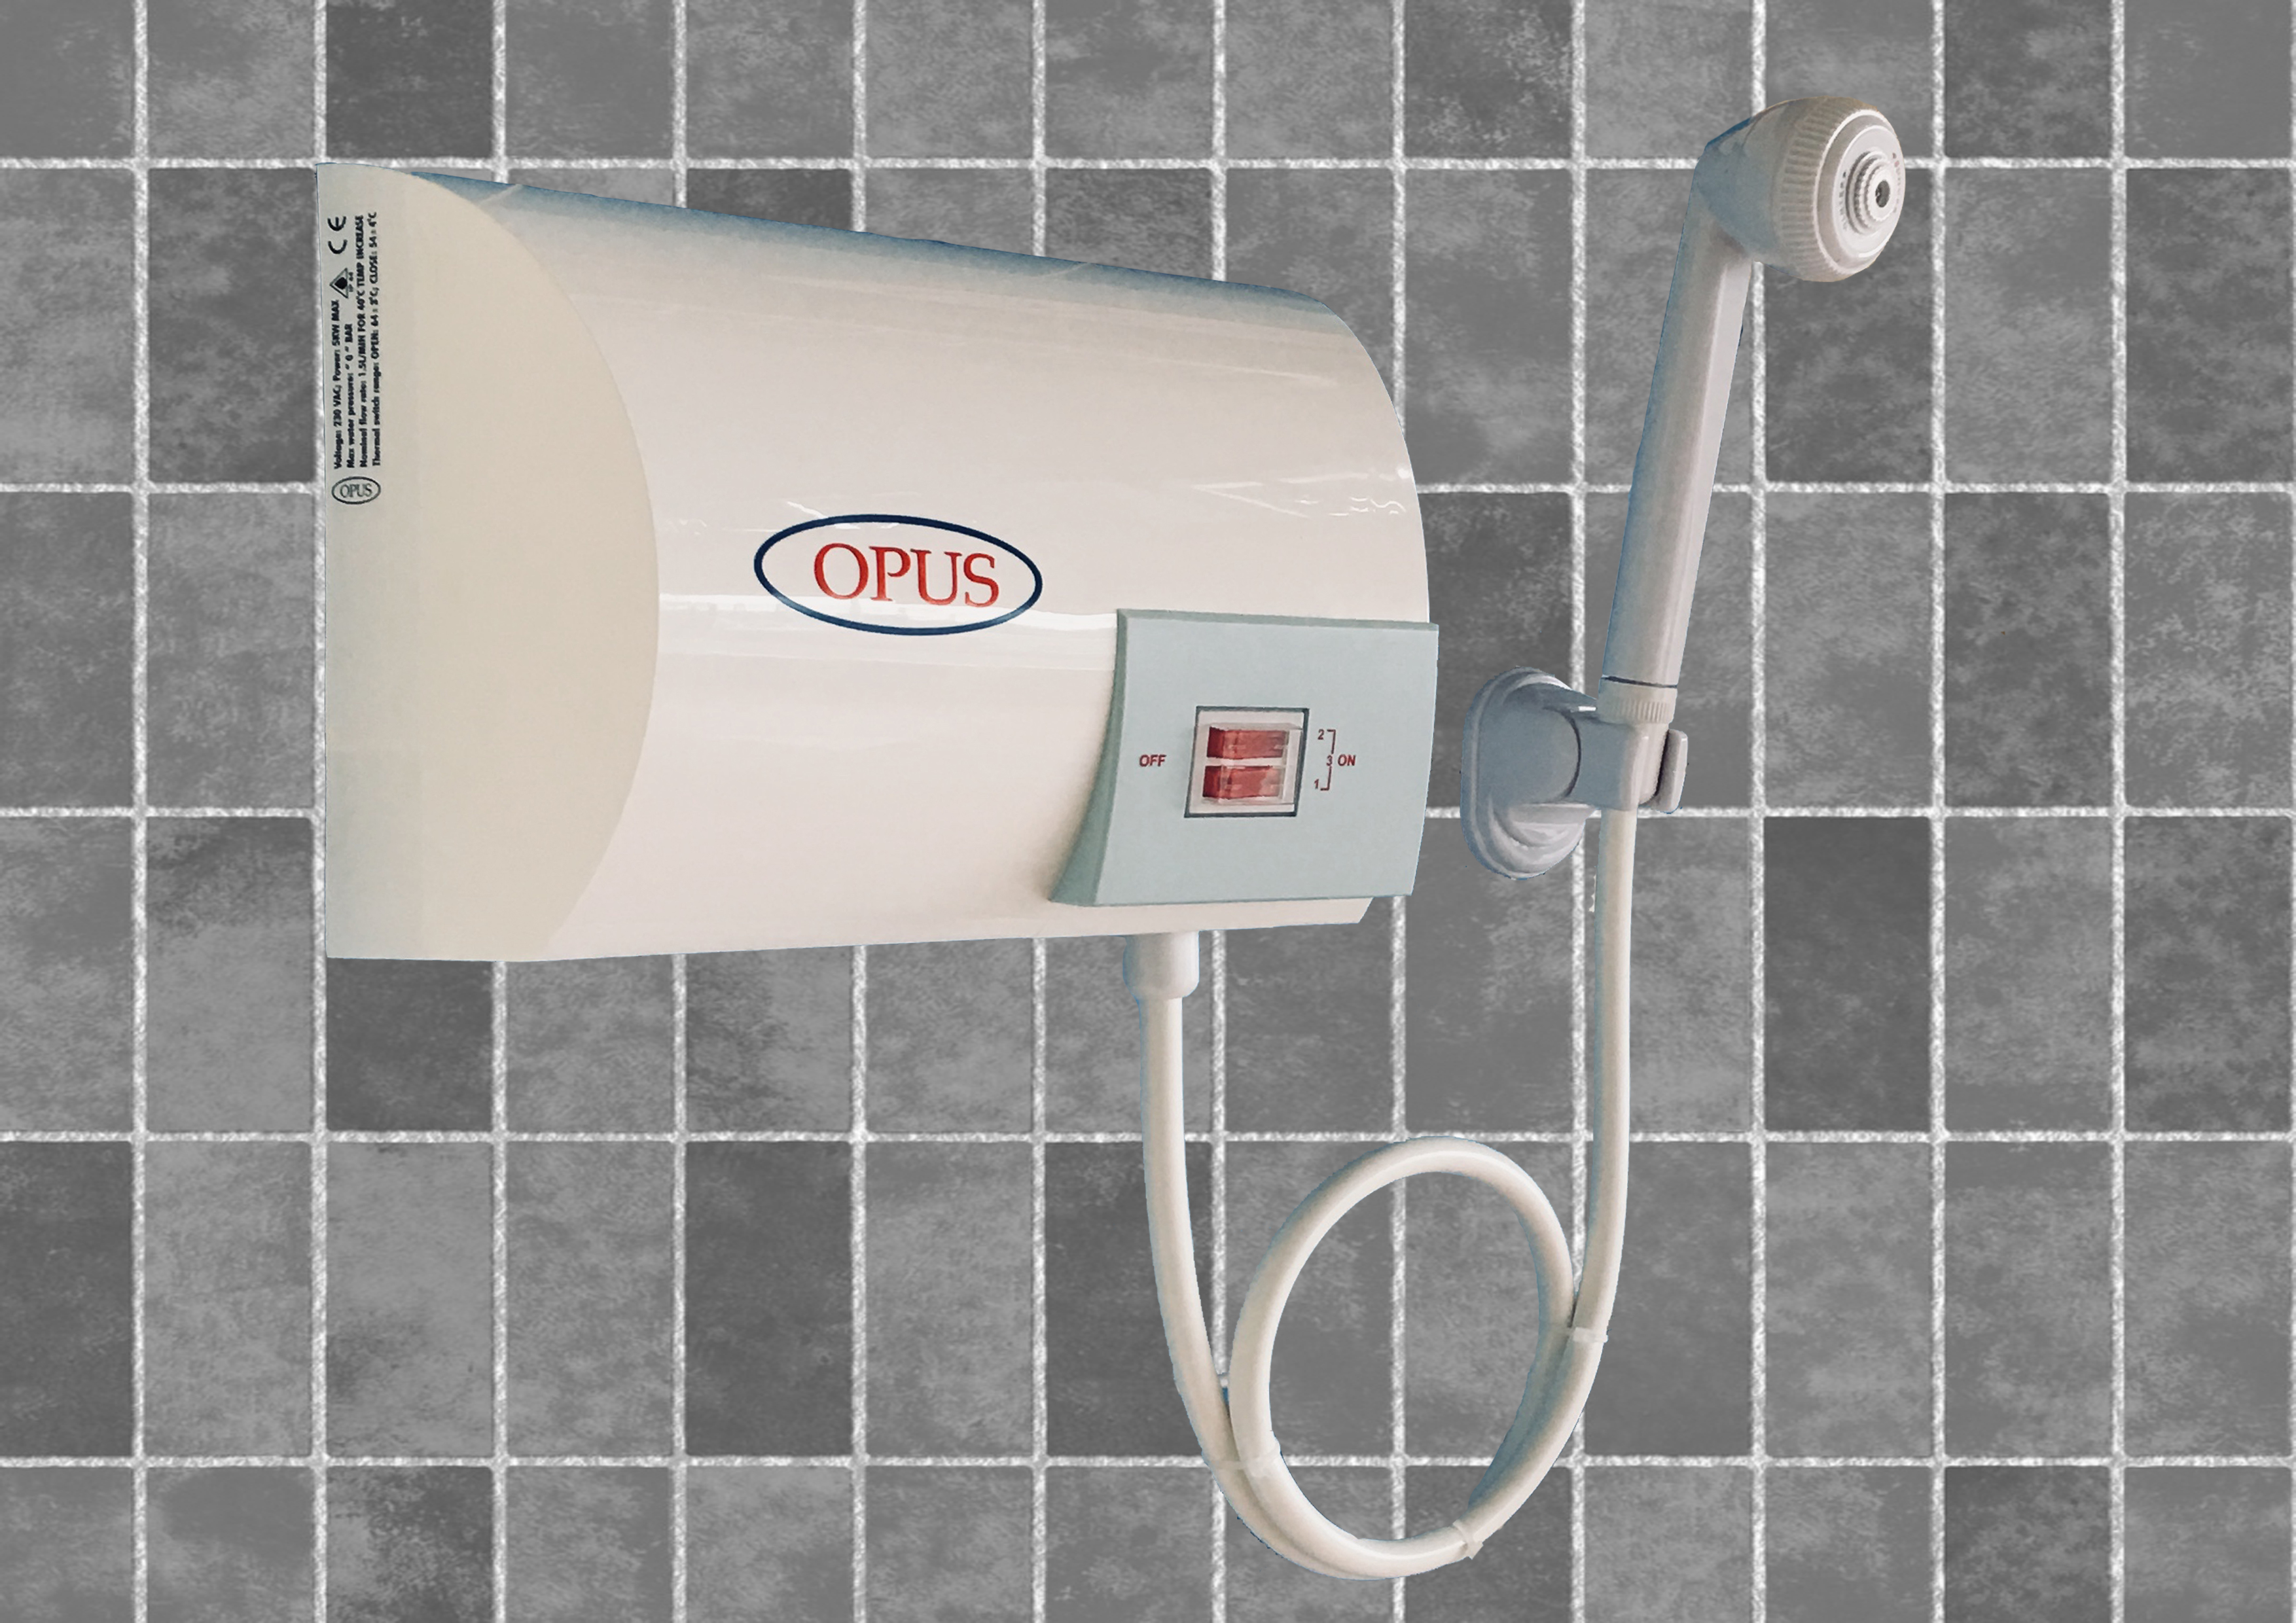 OPUS INSTANT ELECTRIC SHOWER 5KW